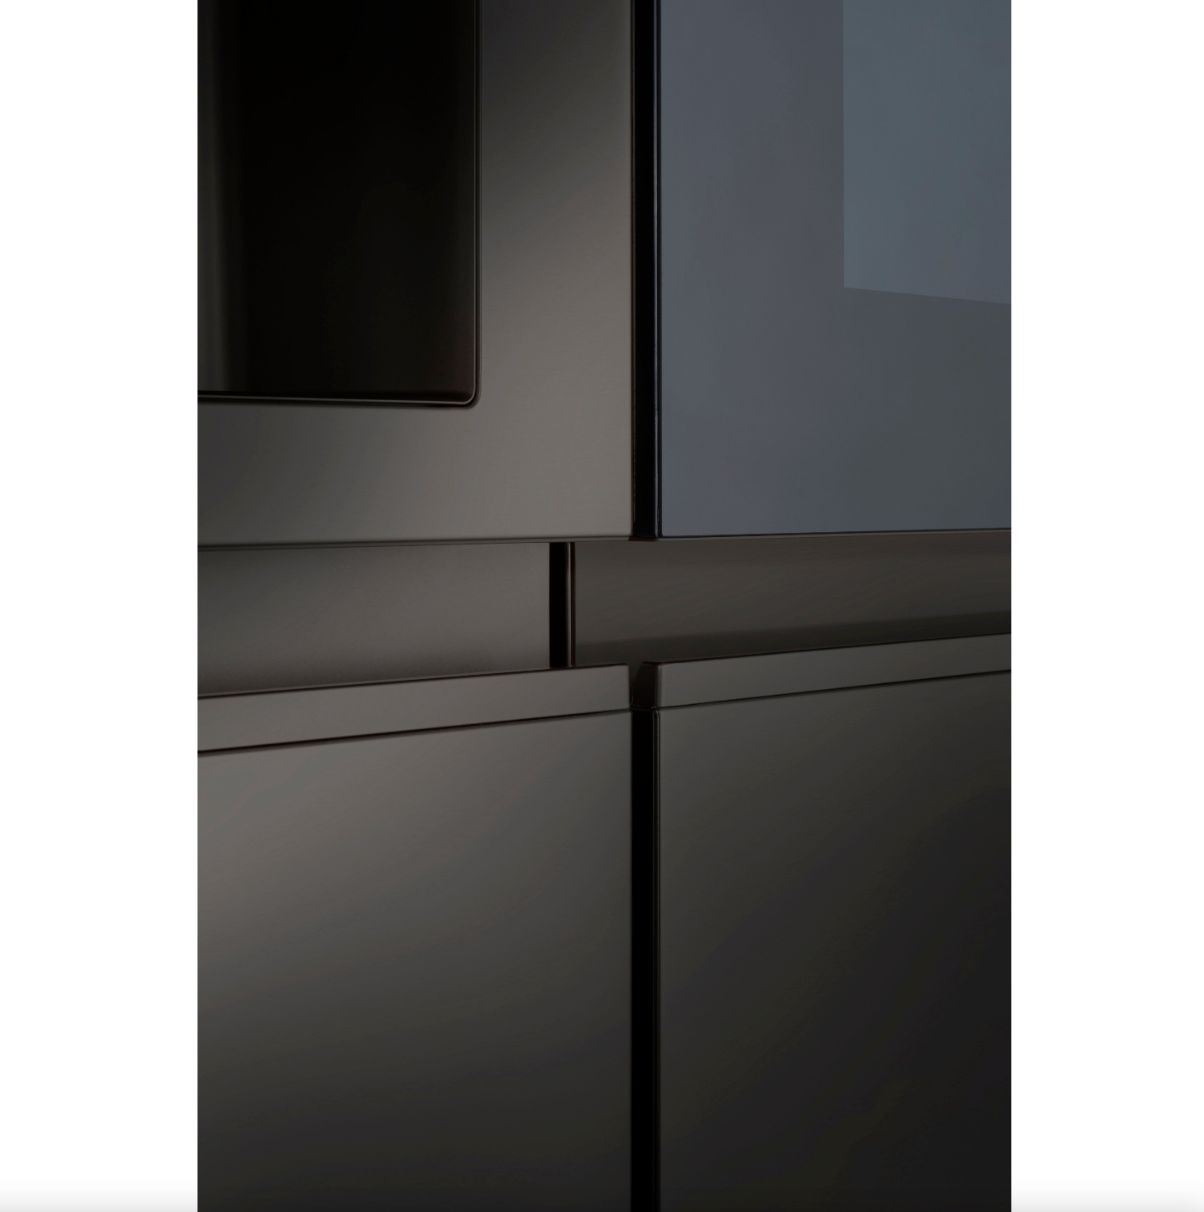 LG 36 Inch Side-by-Side InstaView Refrigerator with Craft Ice in Black Stainless 27 Cu. Ft. (LRSOS2706D)